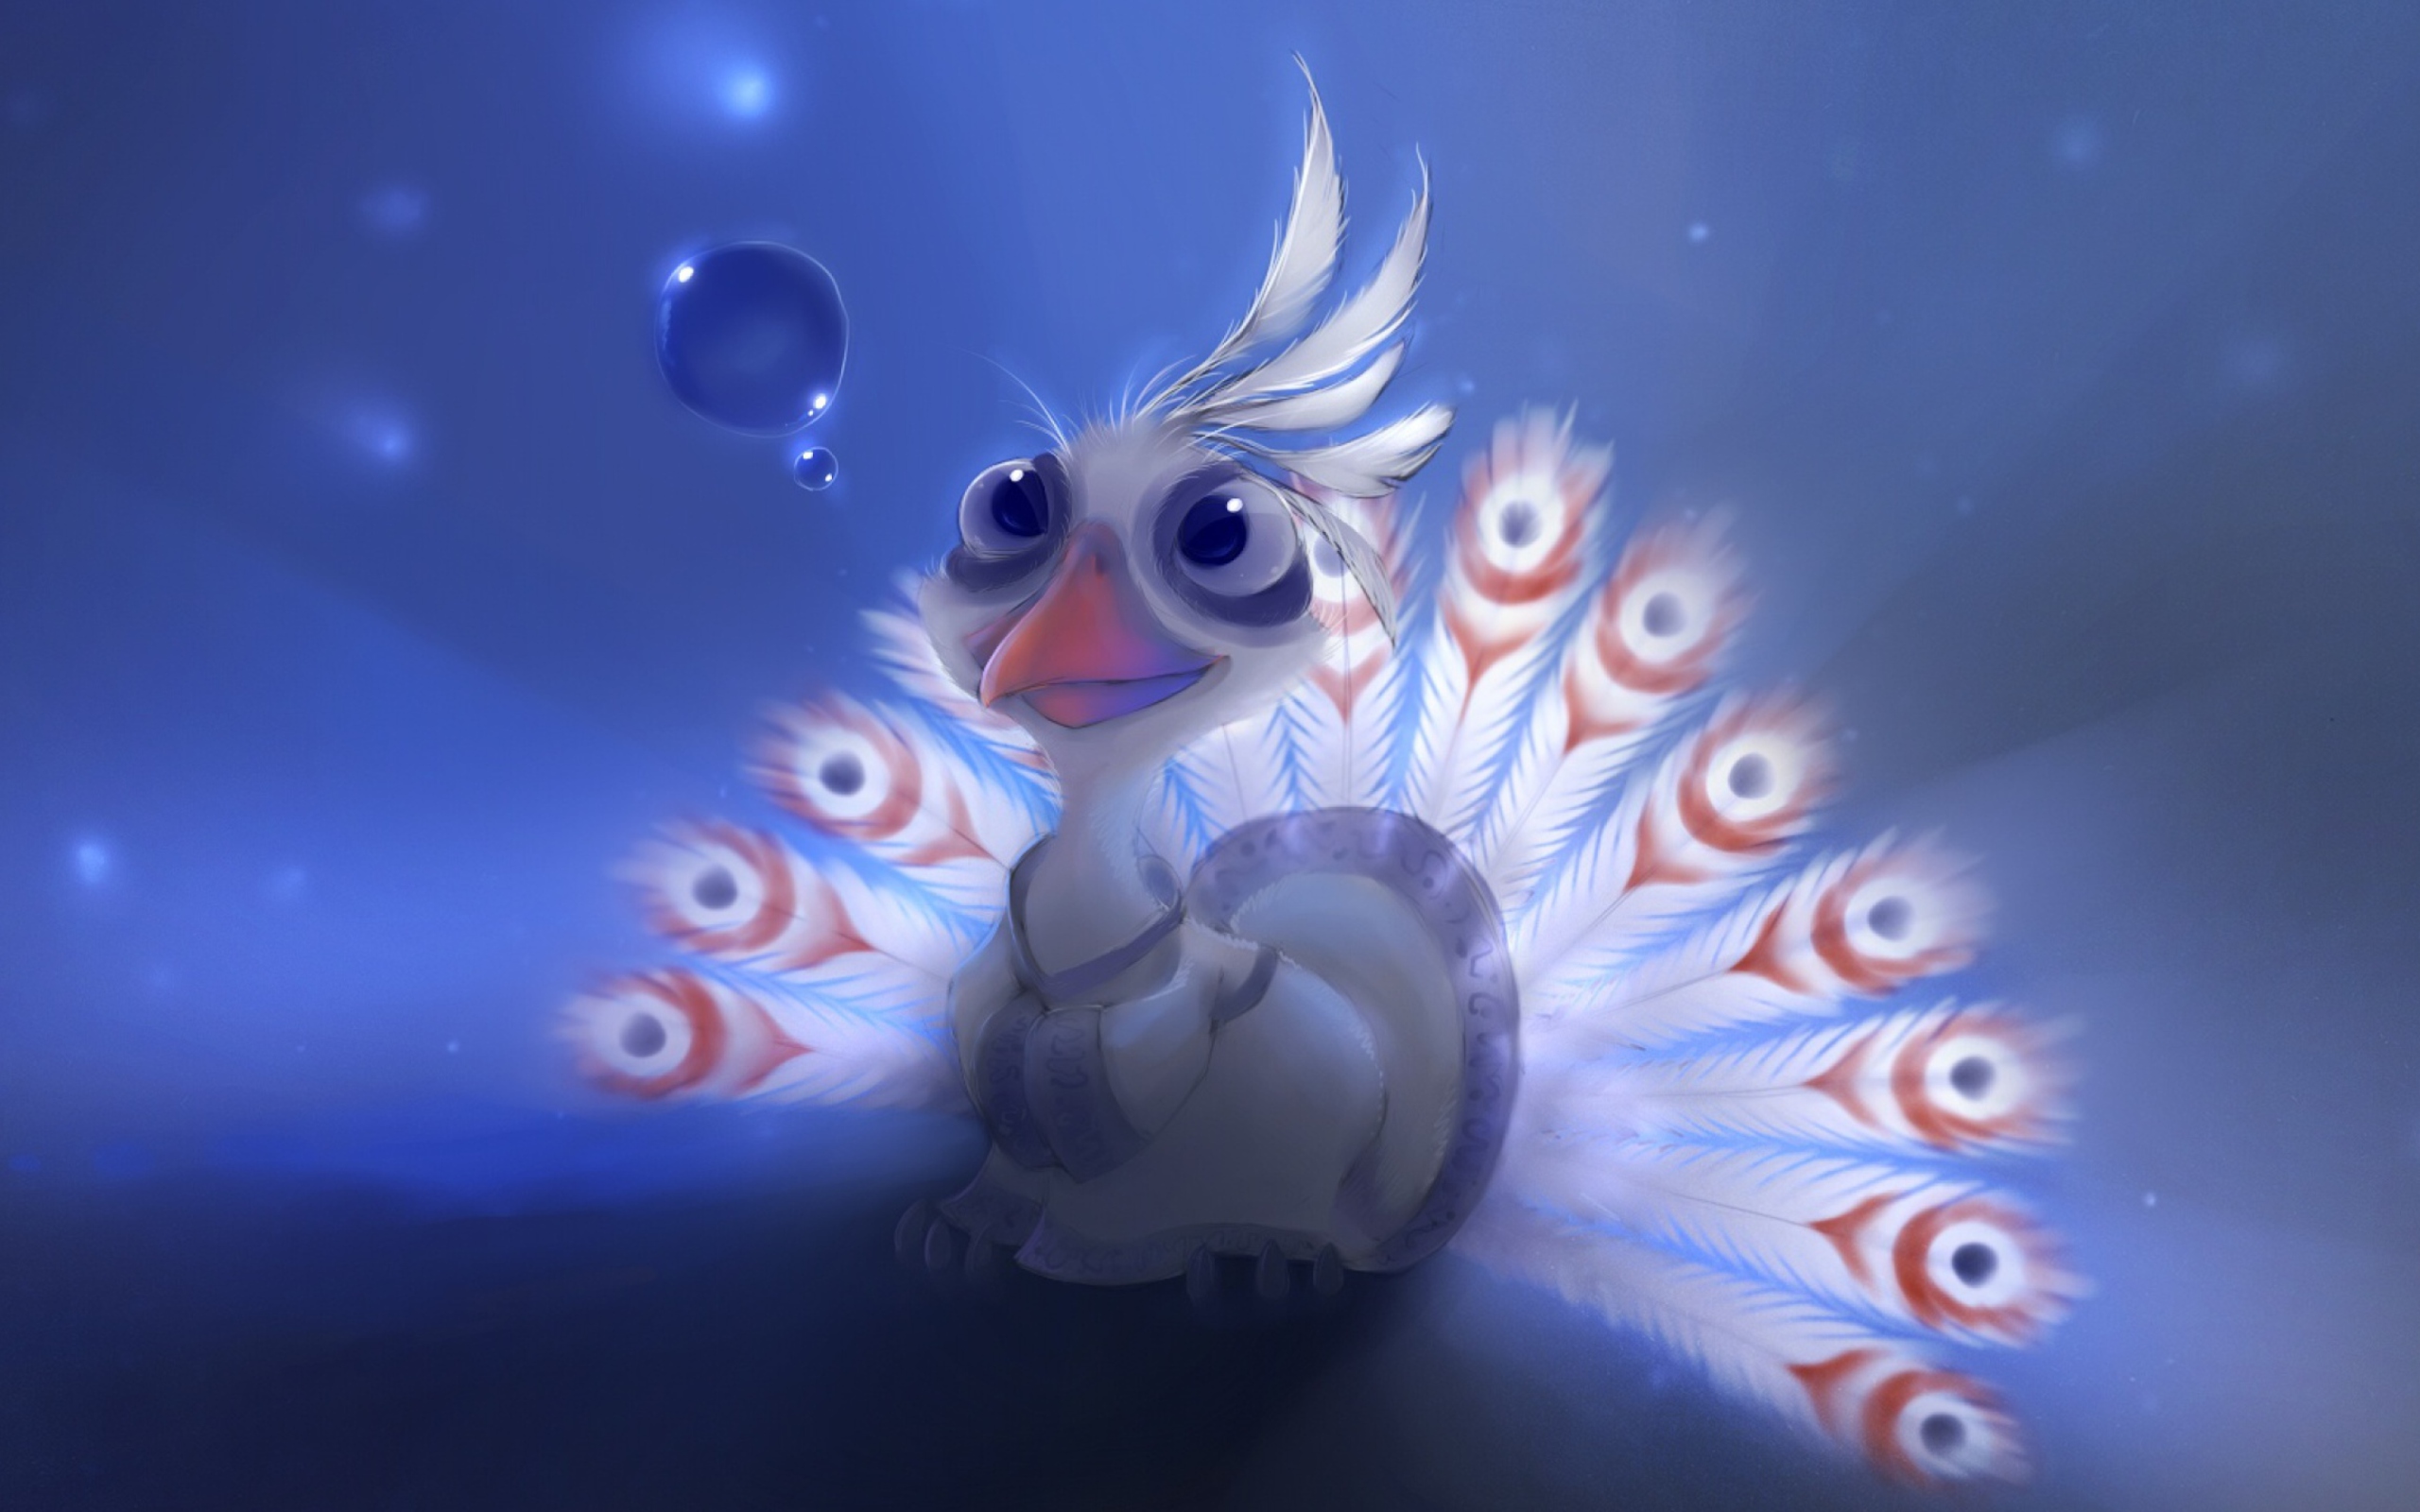 White Peacock Painting wallpaper 2560x1600